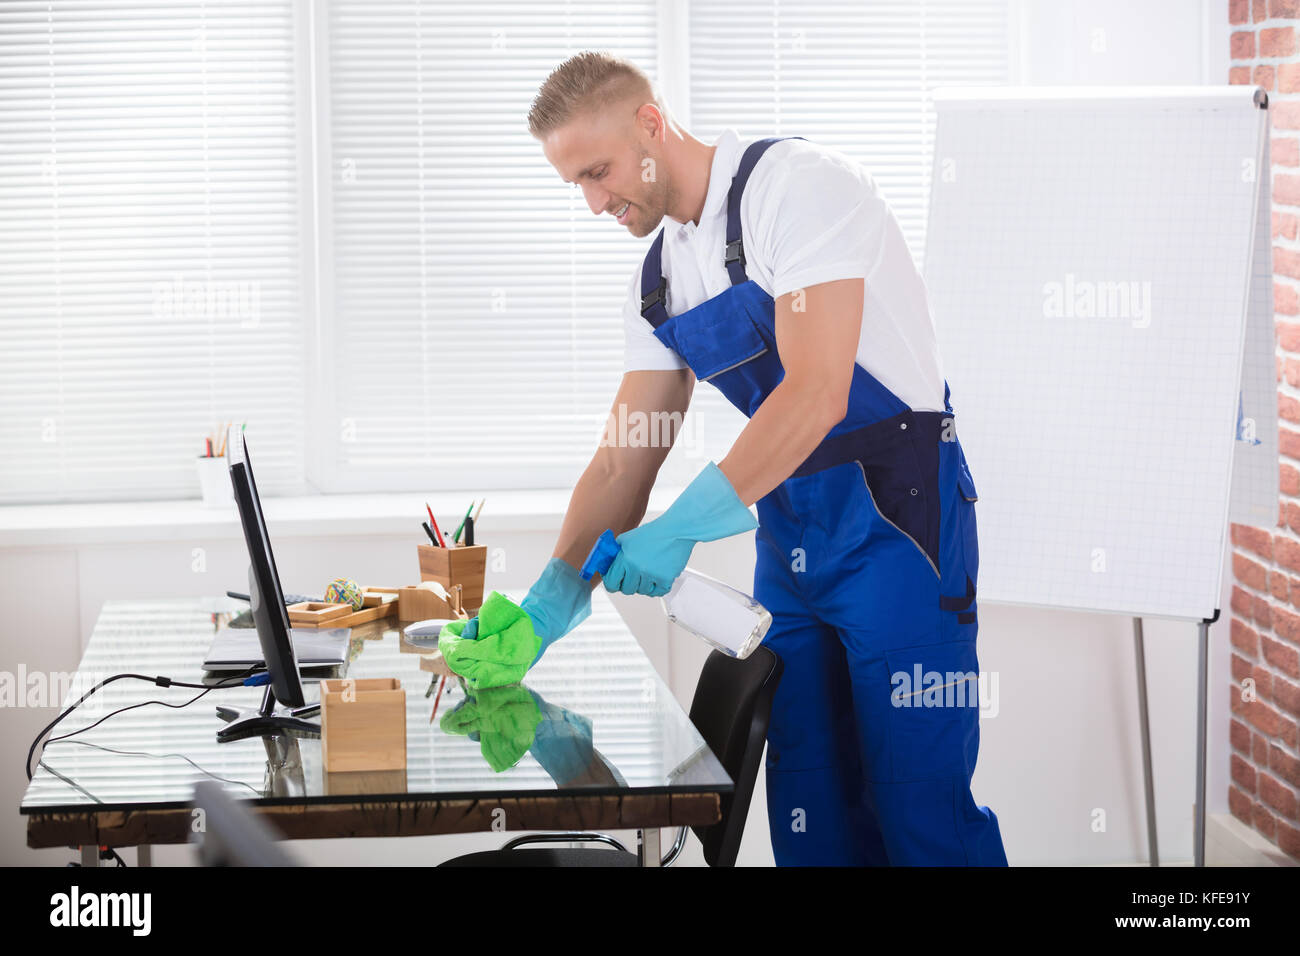 Portrait Of A Smiling Male Janitor Cleaning Desk With Cloth At Workplace Stock Photo